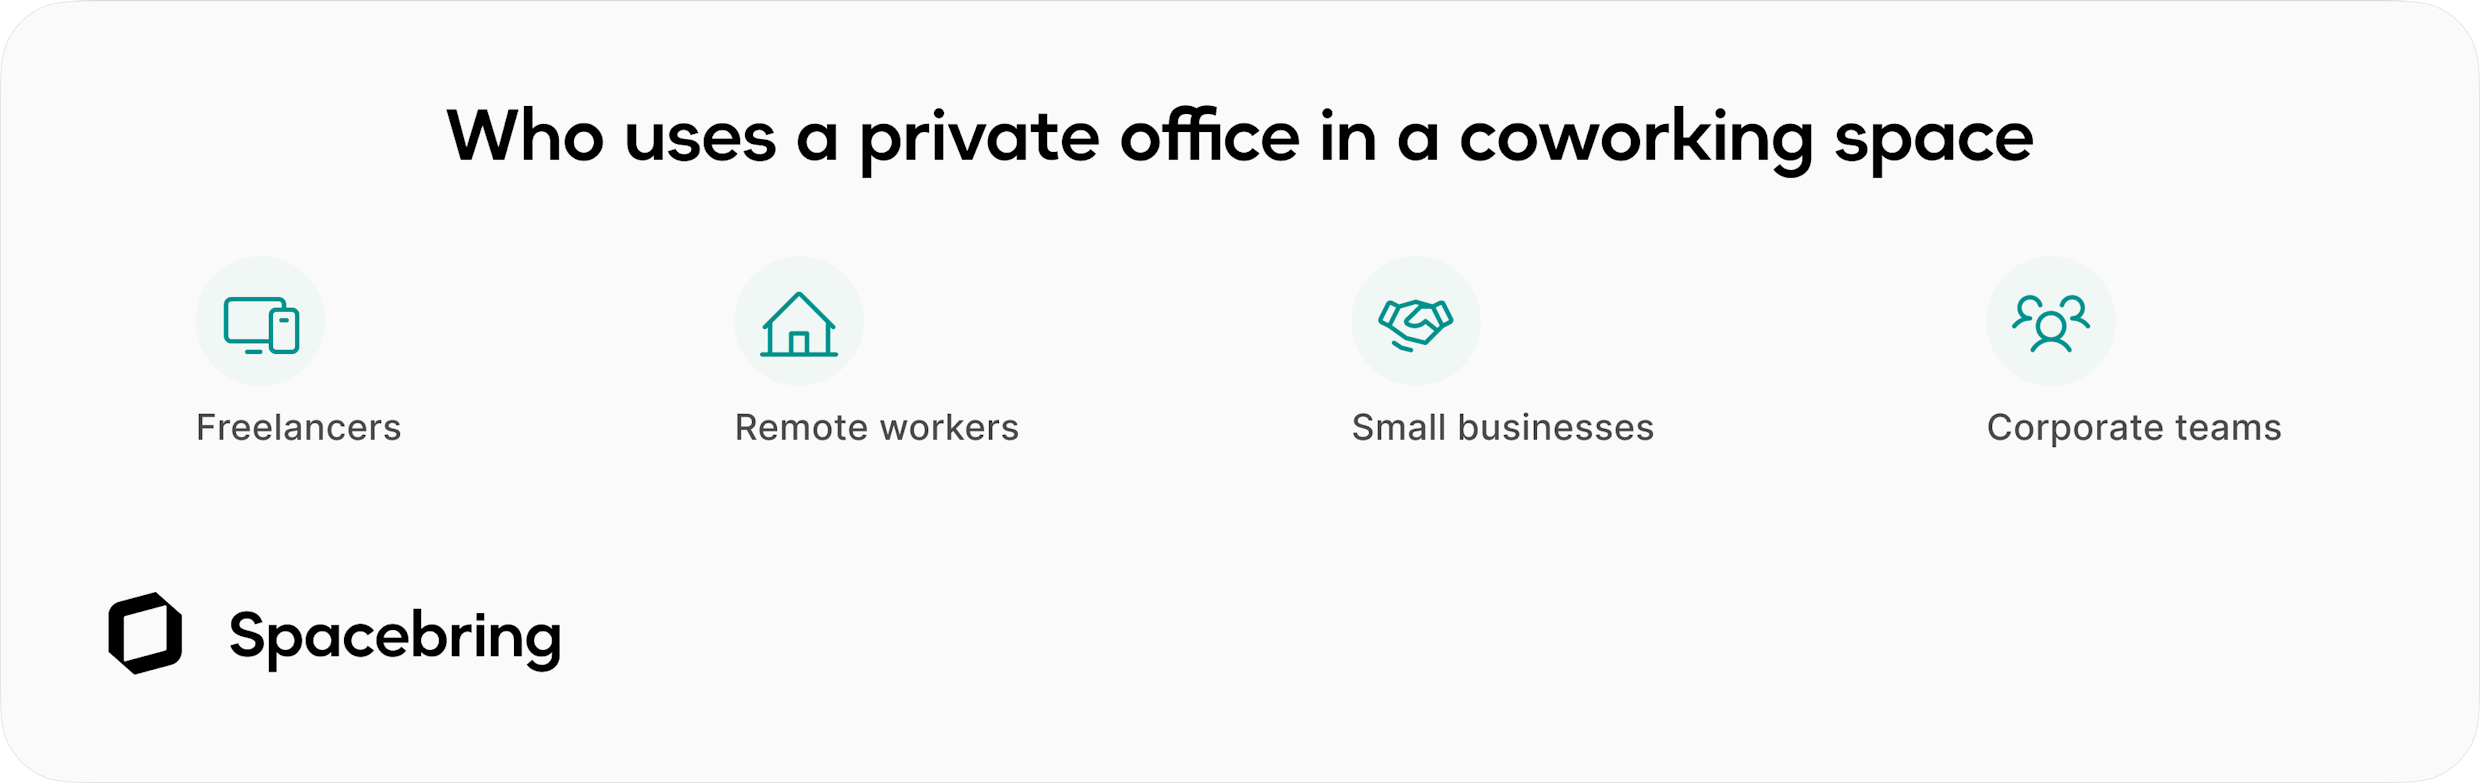 Users of private offices at coworking spaces